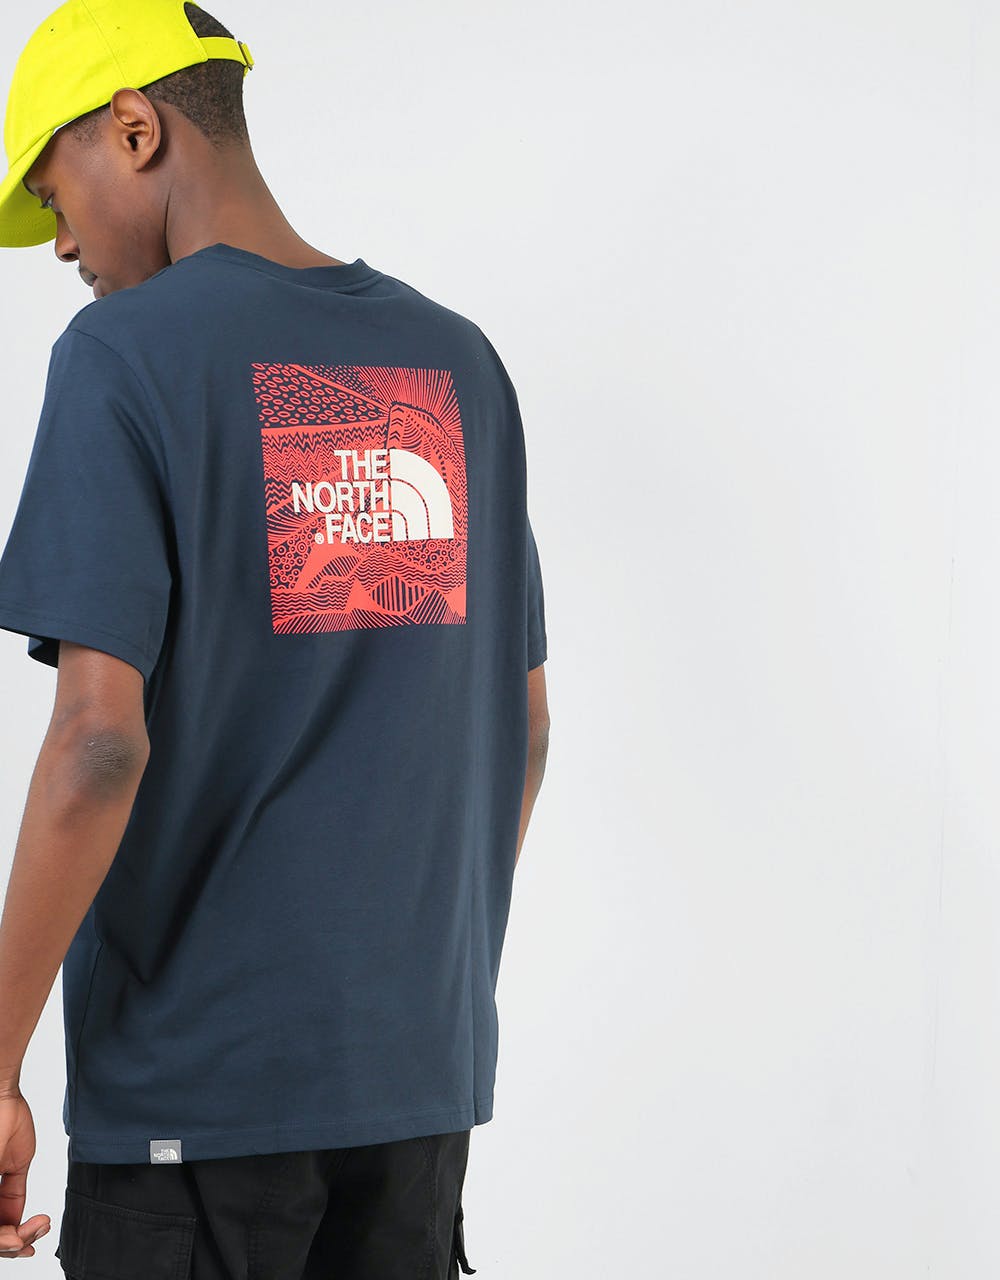 The North Face S/S Red Box Celebration T-Shirt - Urban Navy/Fiery Red